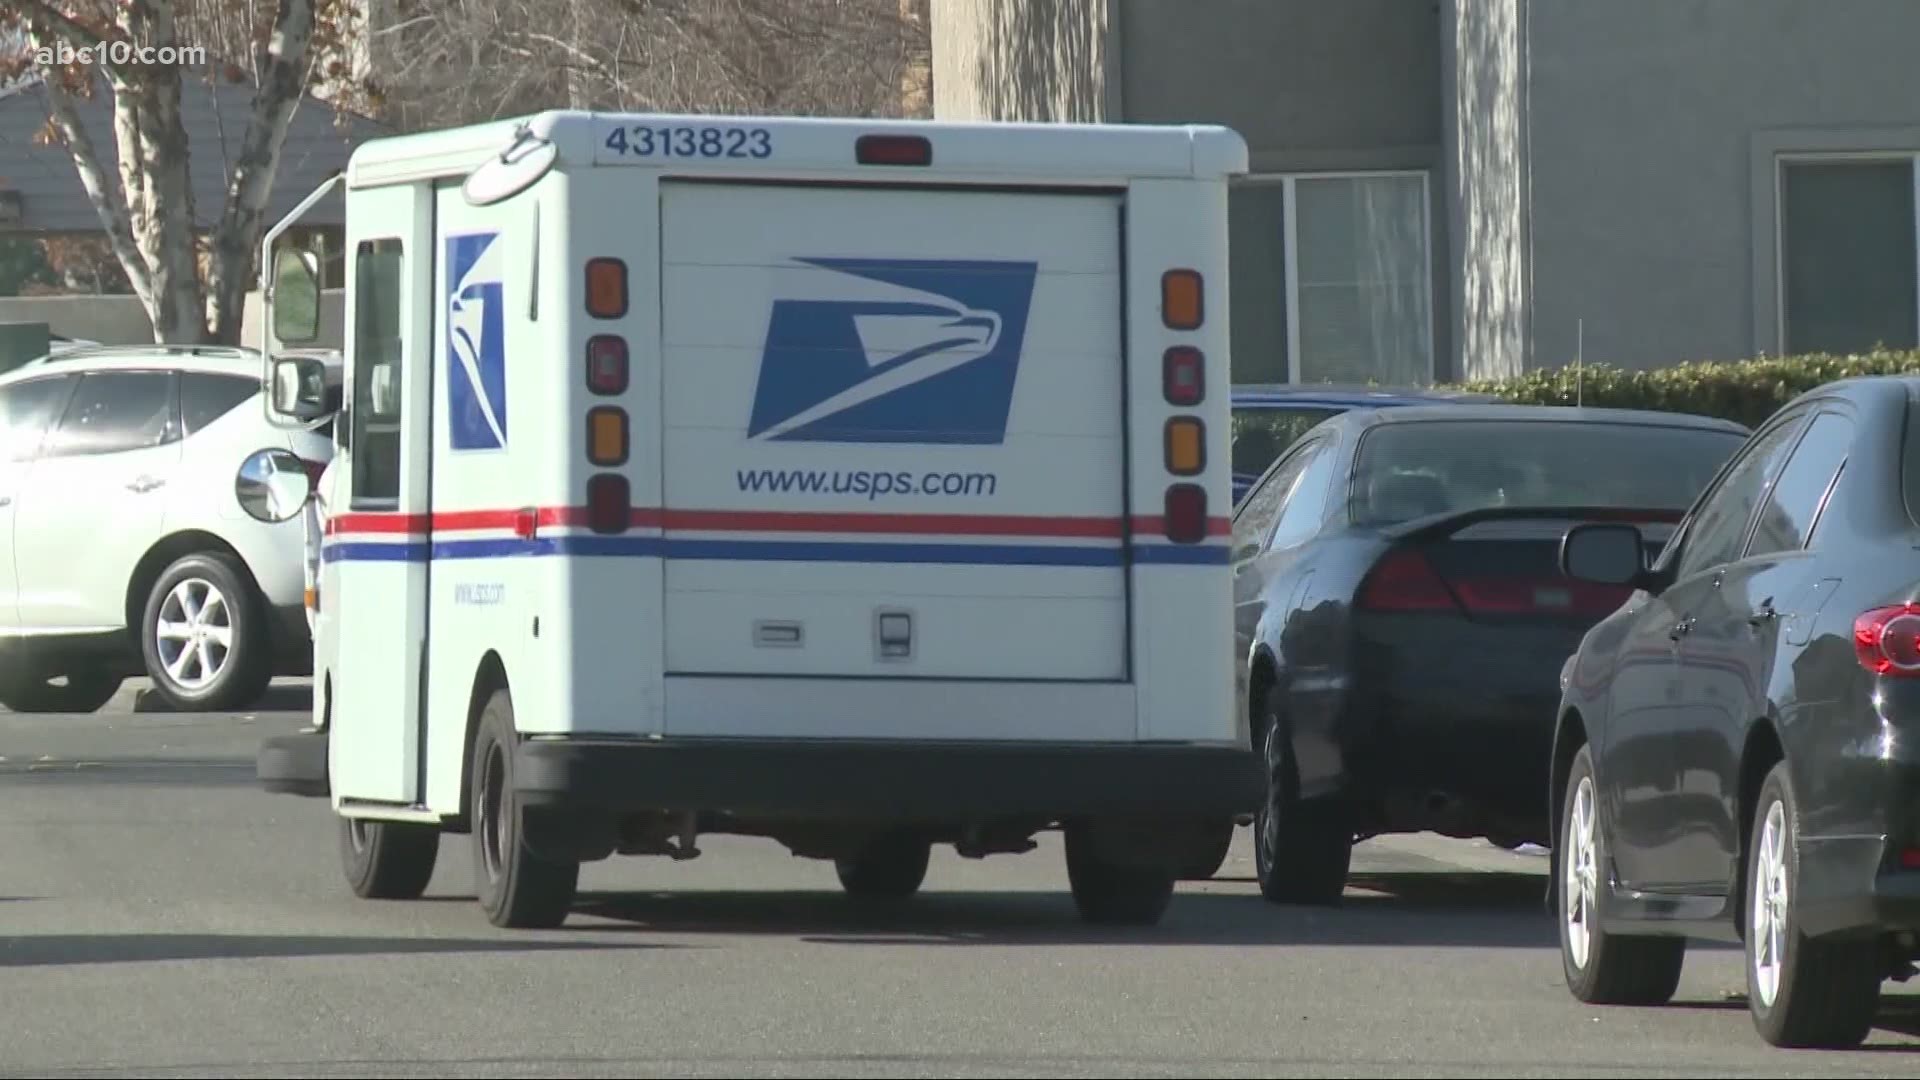 The postal workers union says mail volume is up 50 percent and are still waiting for emergency relief funding to be passed.